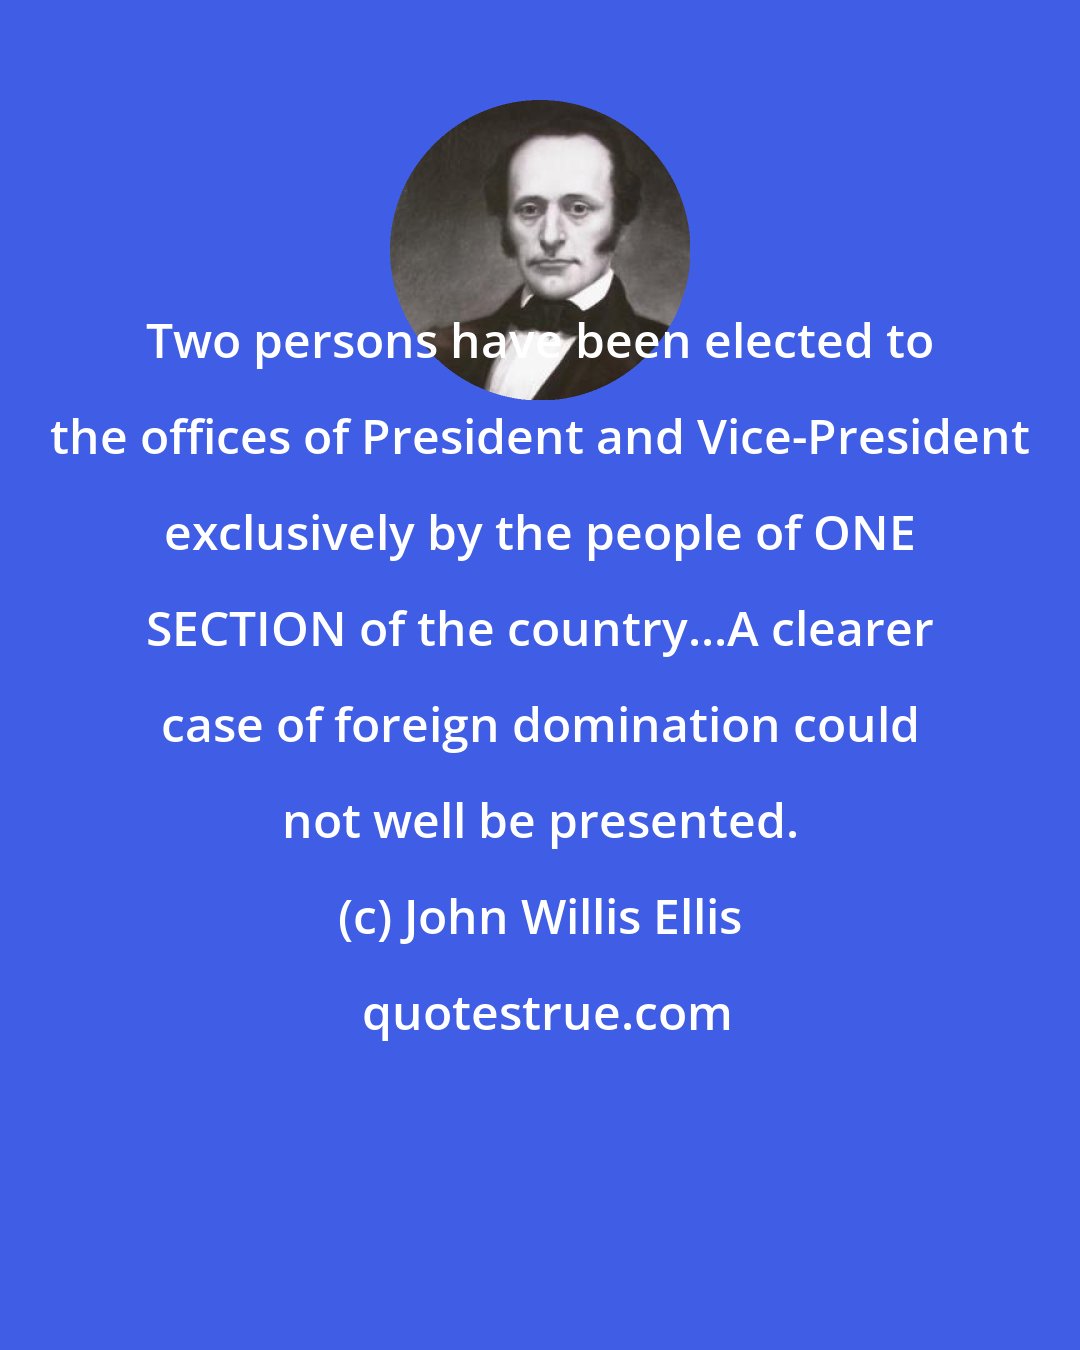 John Willis Ellis: Two persons have been elected to the offices of President and Vice-President exclusively by the people of ONE SECTION of the country...A clearer case of foreign domination could not well be presented.